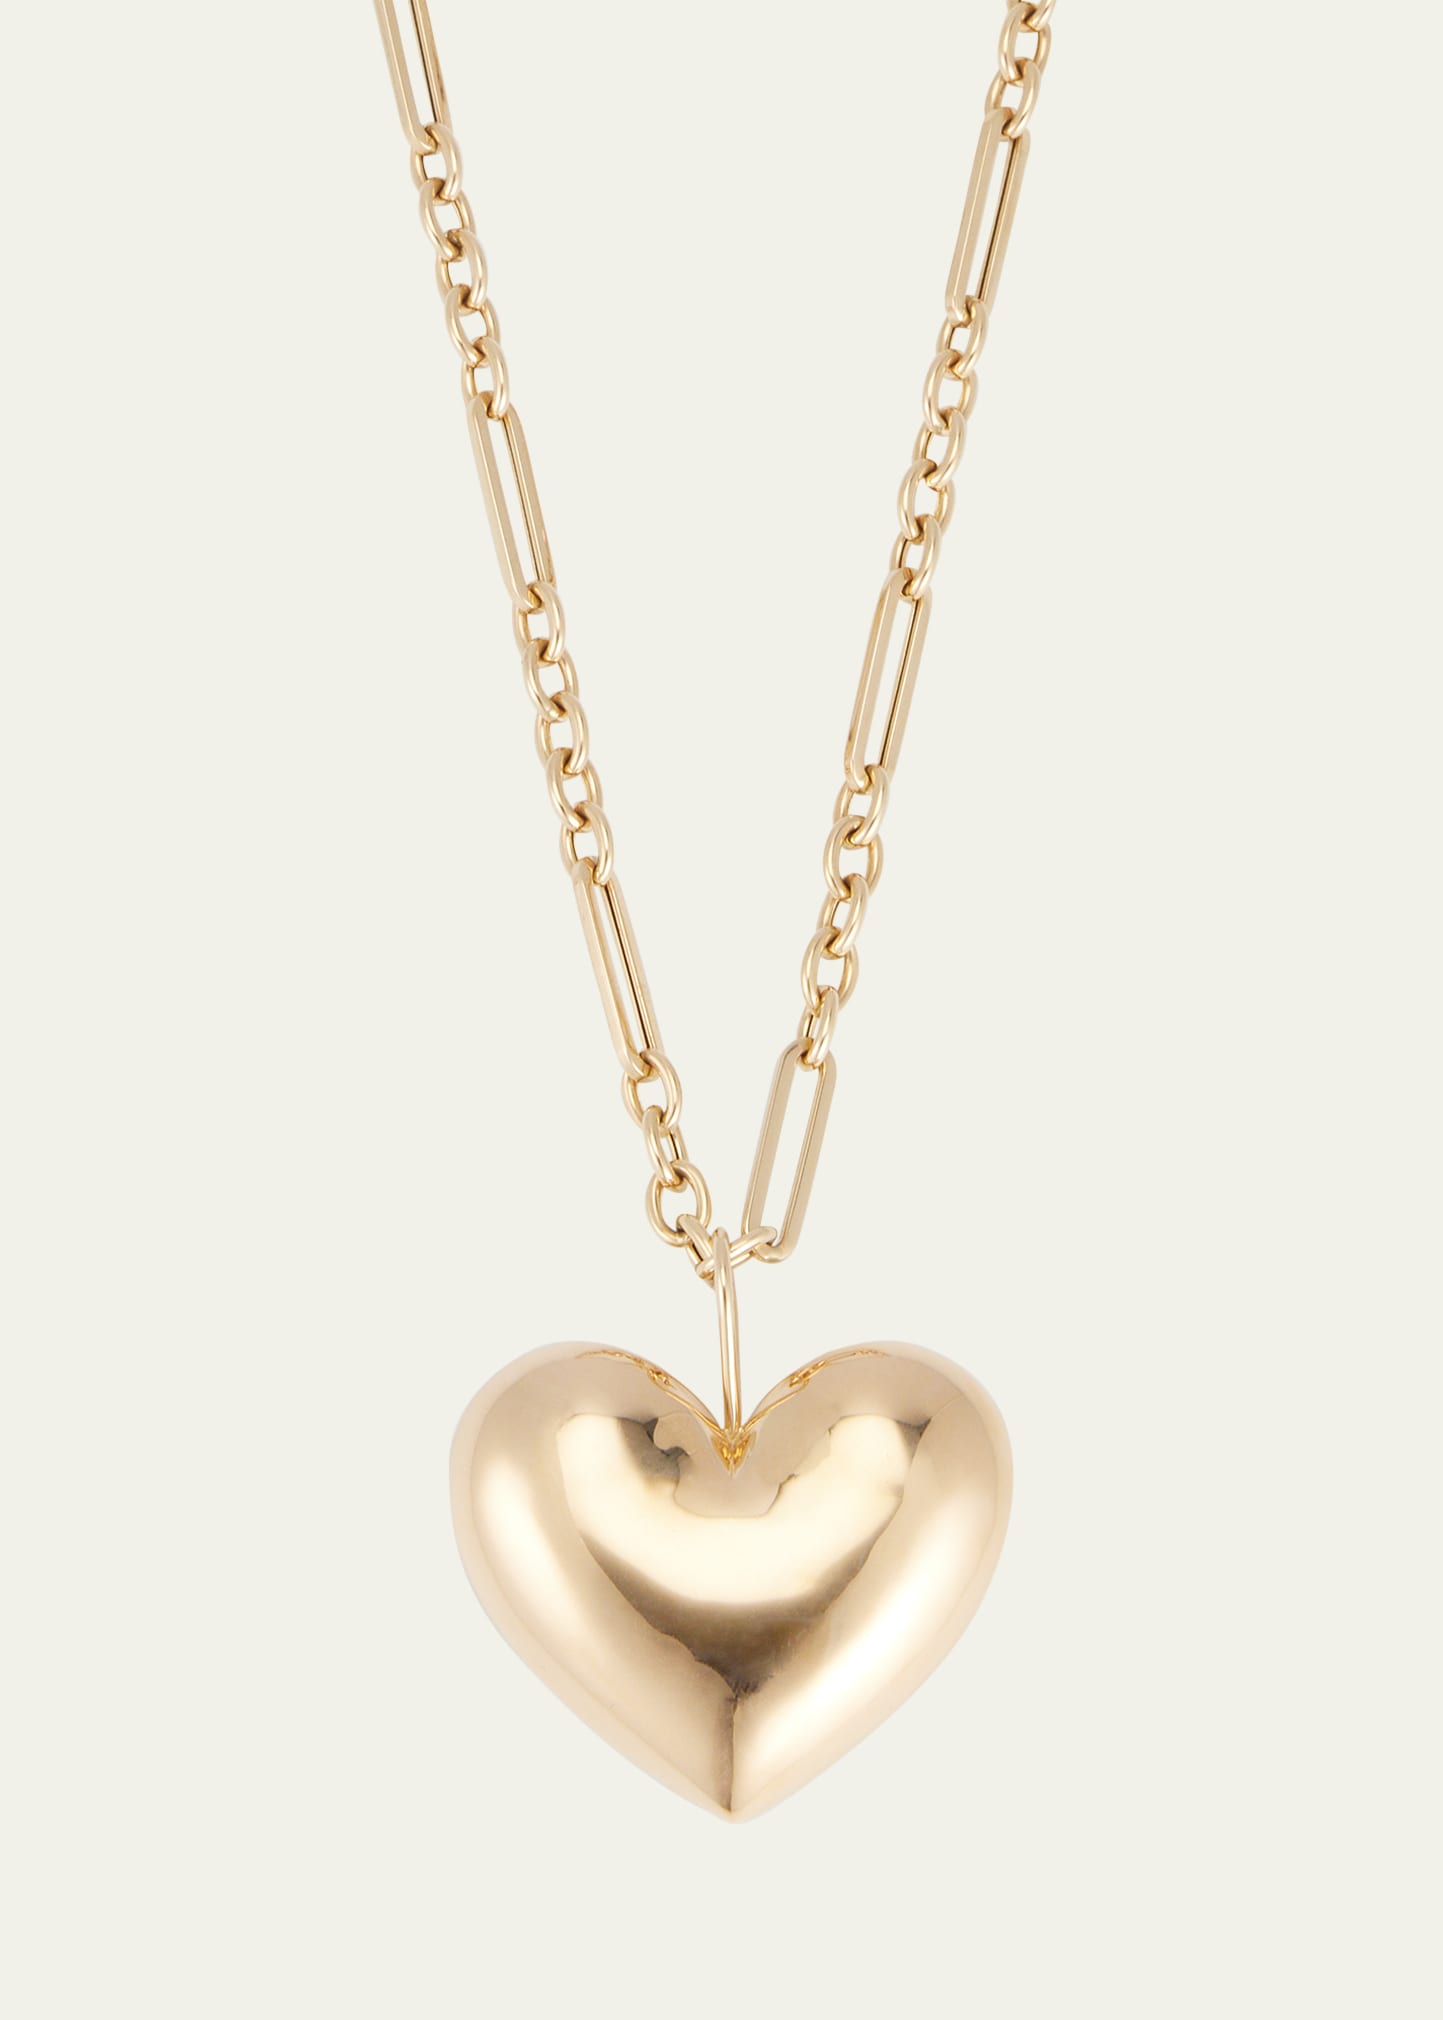 Brent Neale All Gold Puff Heart Pendant On Chain Necklace, 18"l